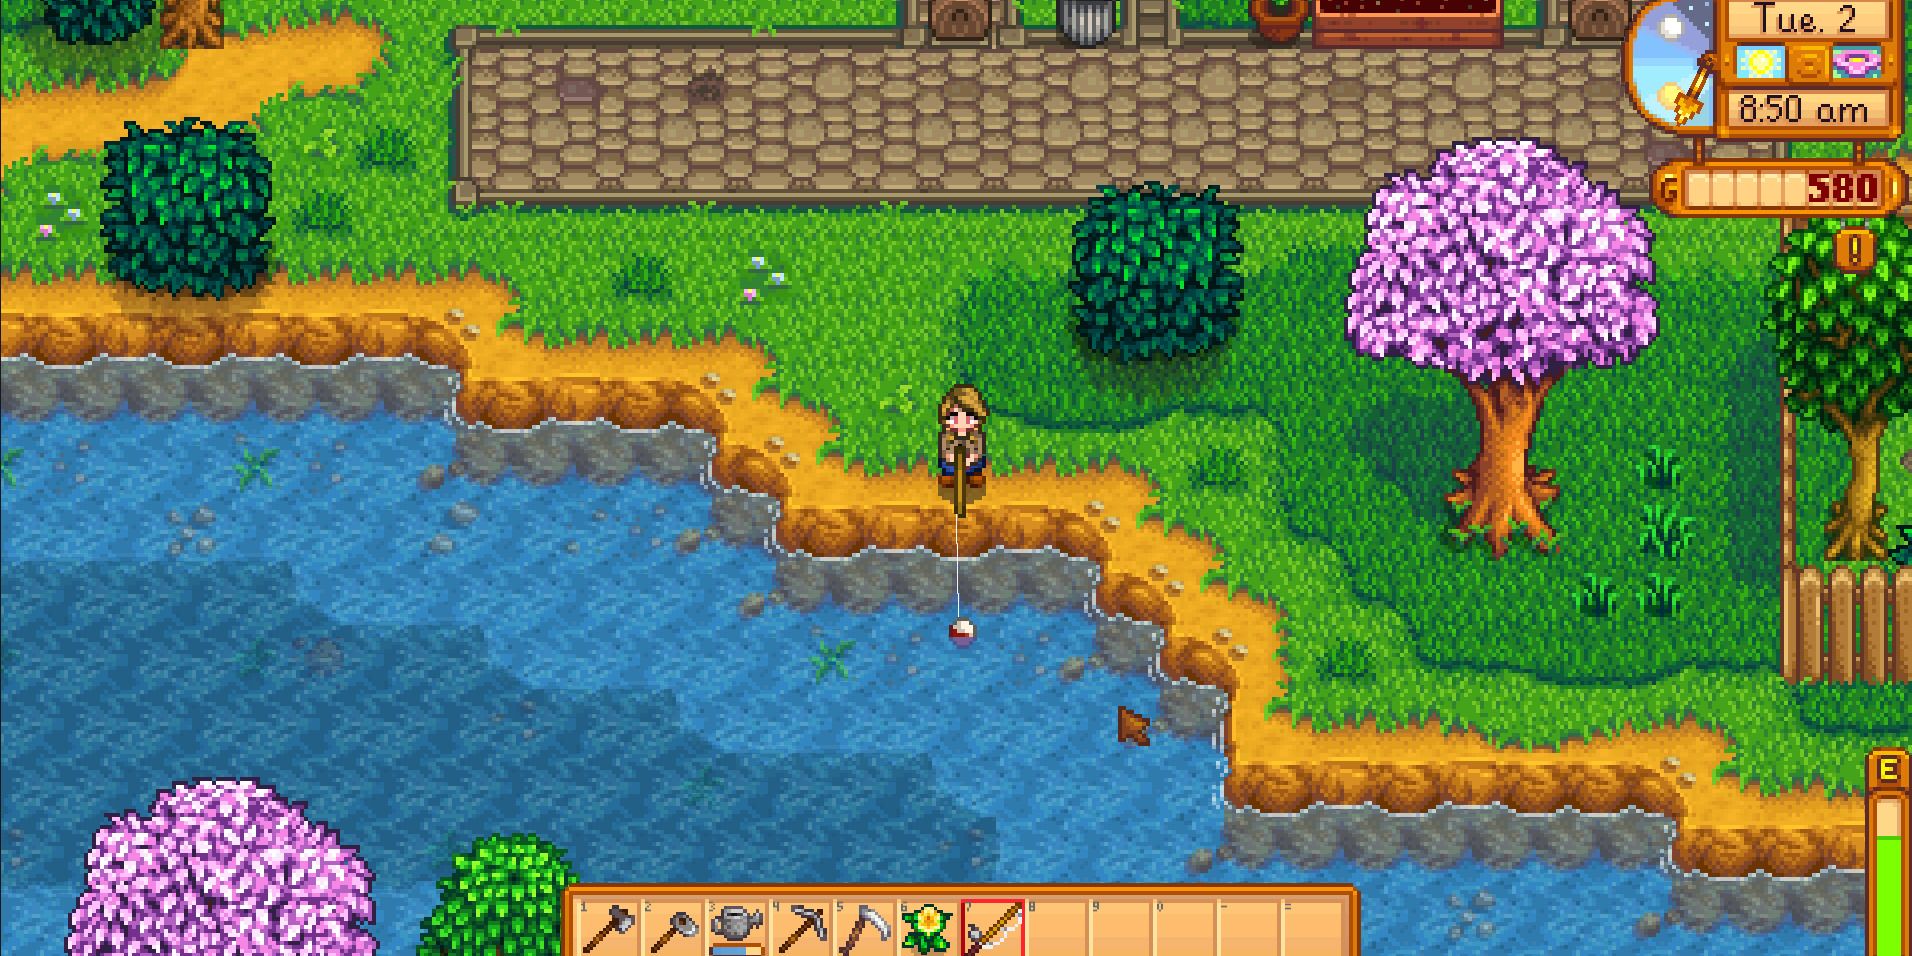 Image of a character fishing in the Pelican Town River in Stardew Valley